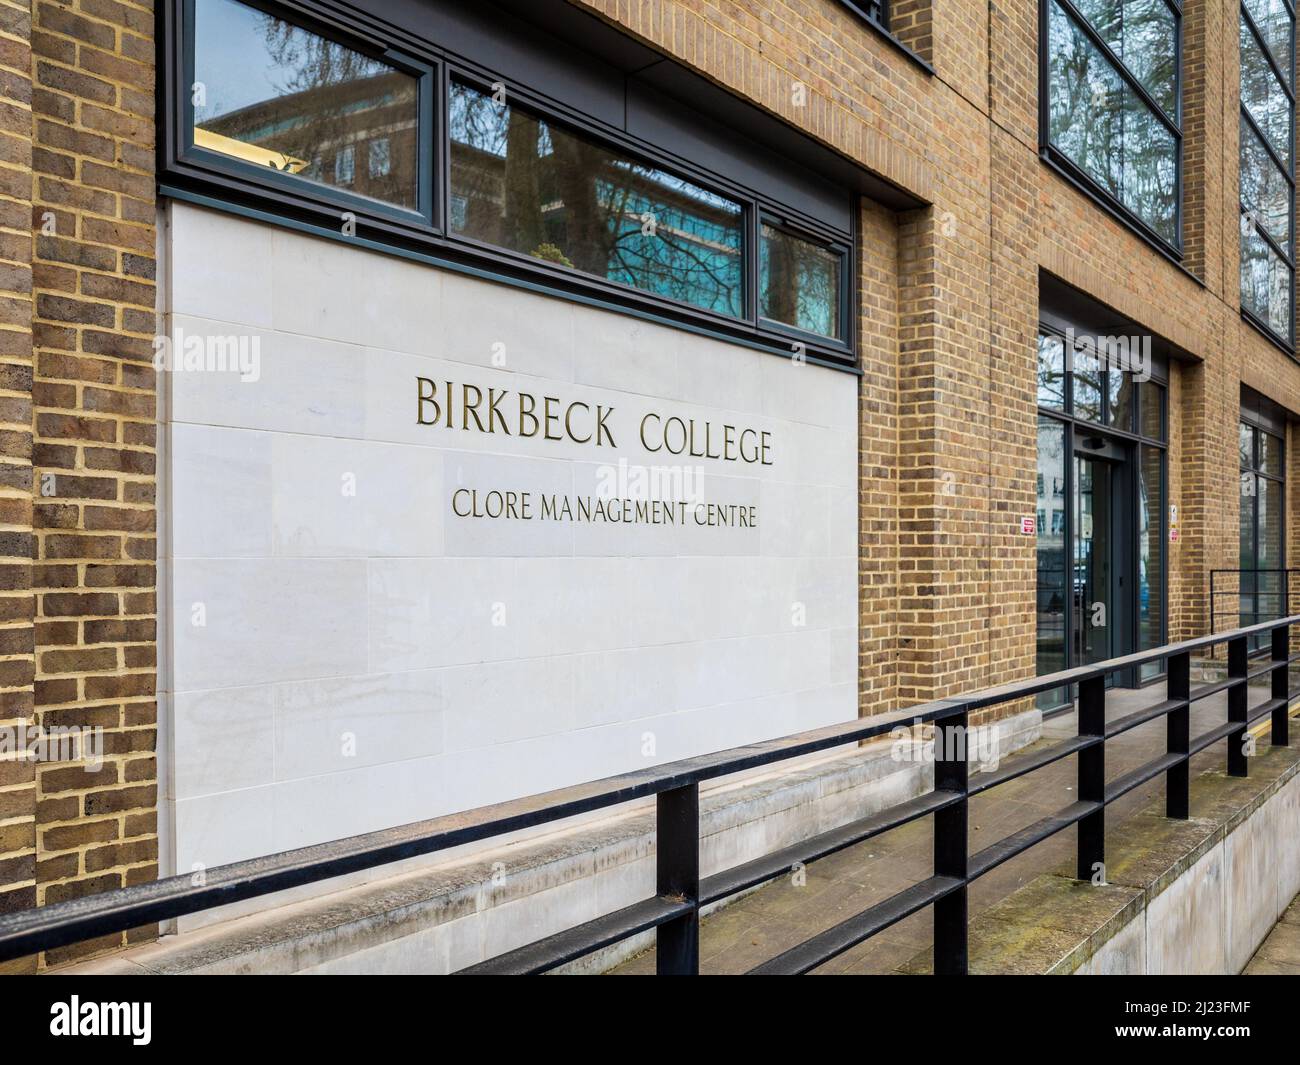 Birkbeck College Clore Management Centre - The Clore Management Centre at Birkbeck College, University of London. Stock Photo